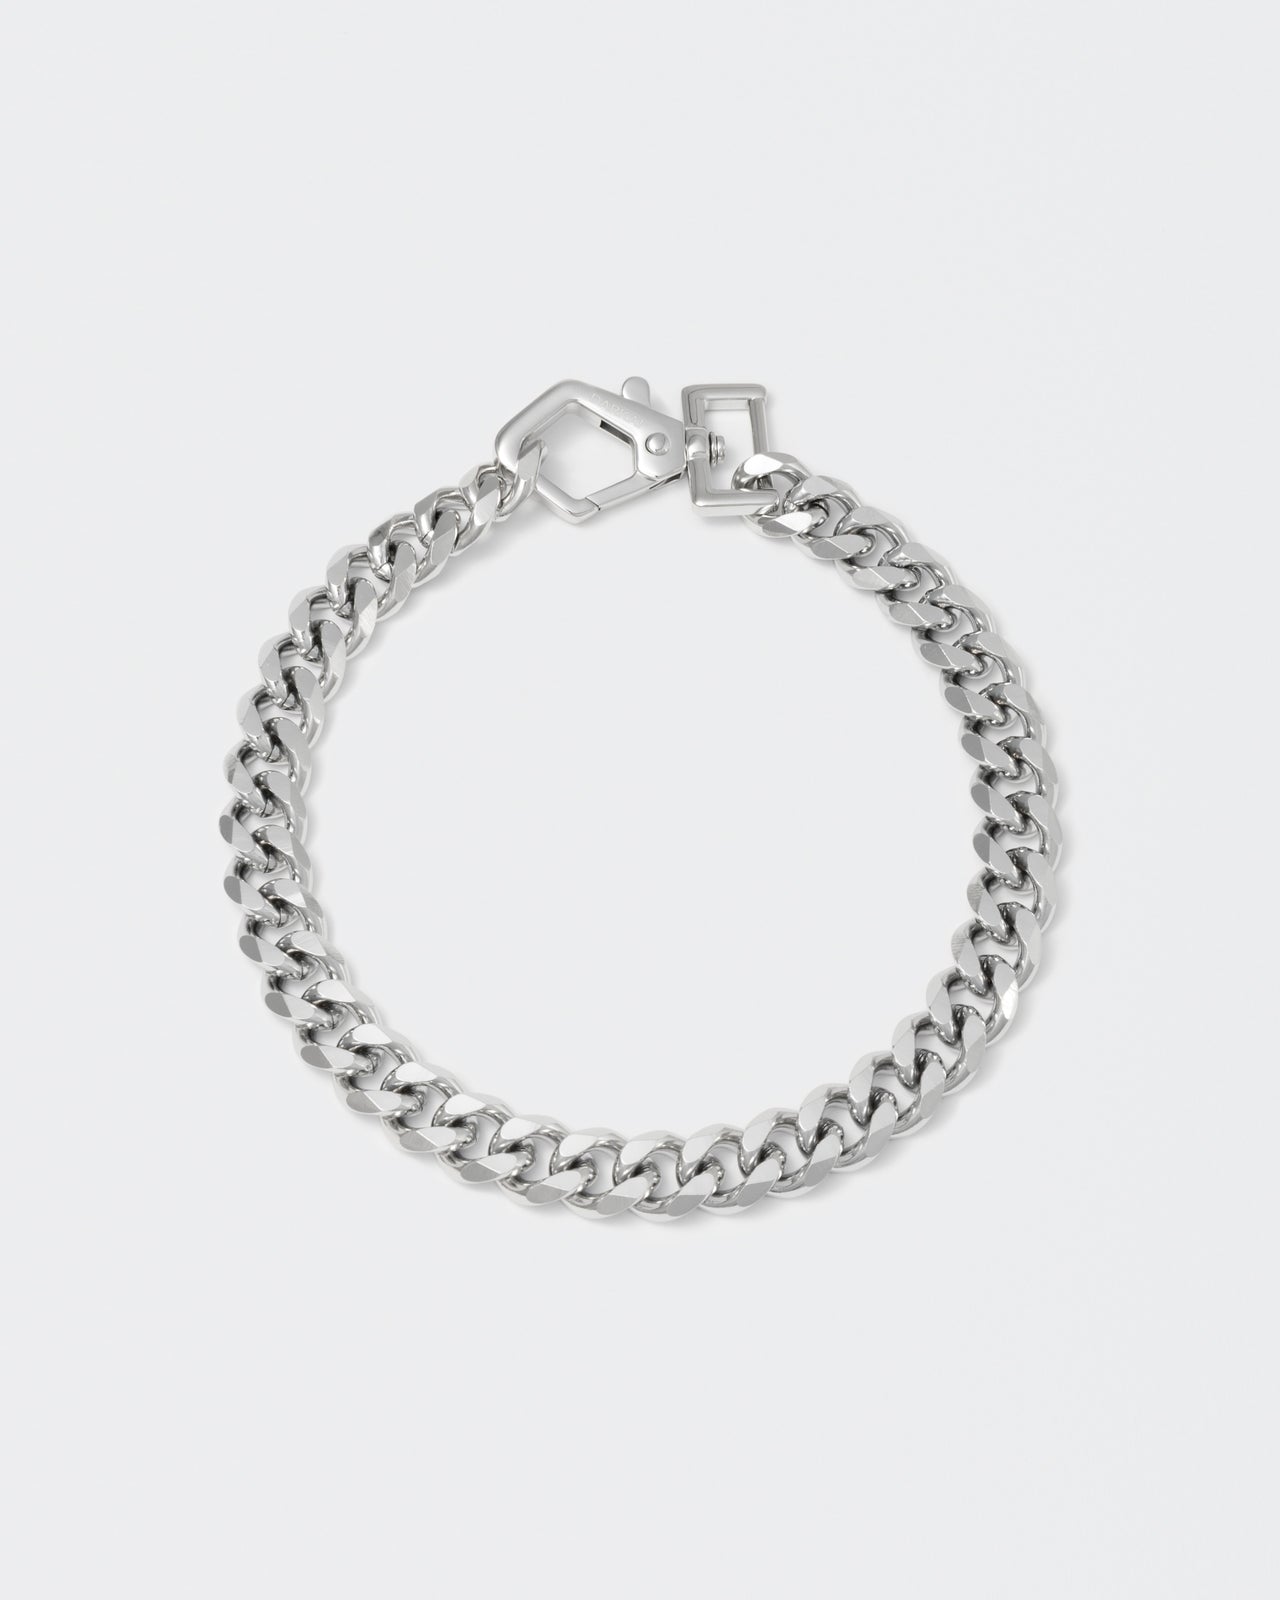 Cutting edge cuban chain choker with 18kt white gold coating and oversize carabiner clasp with engraved logo